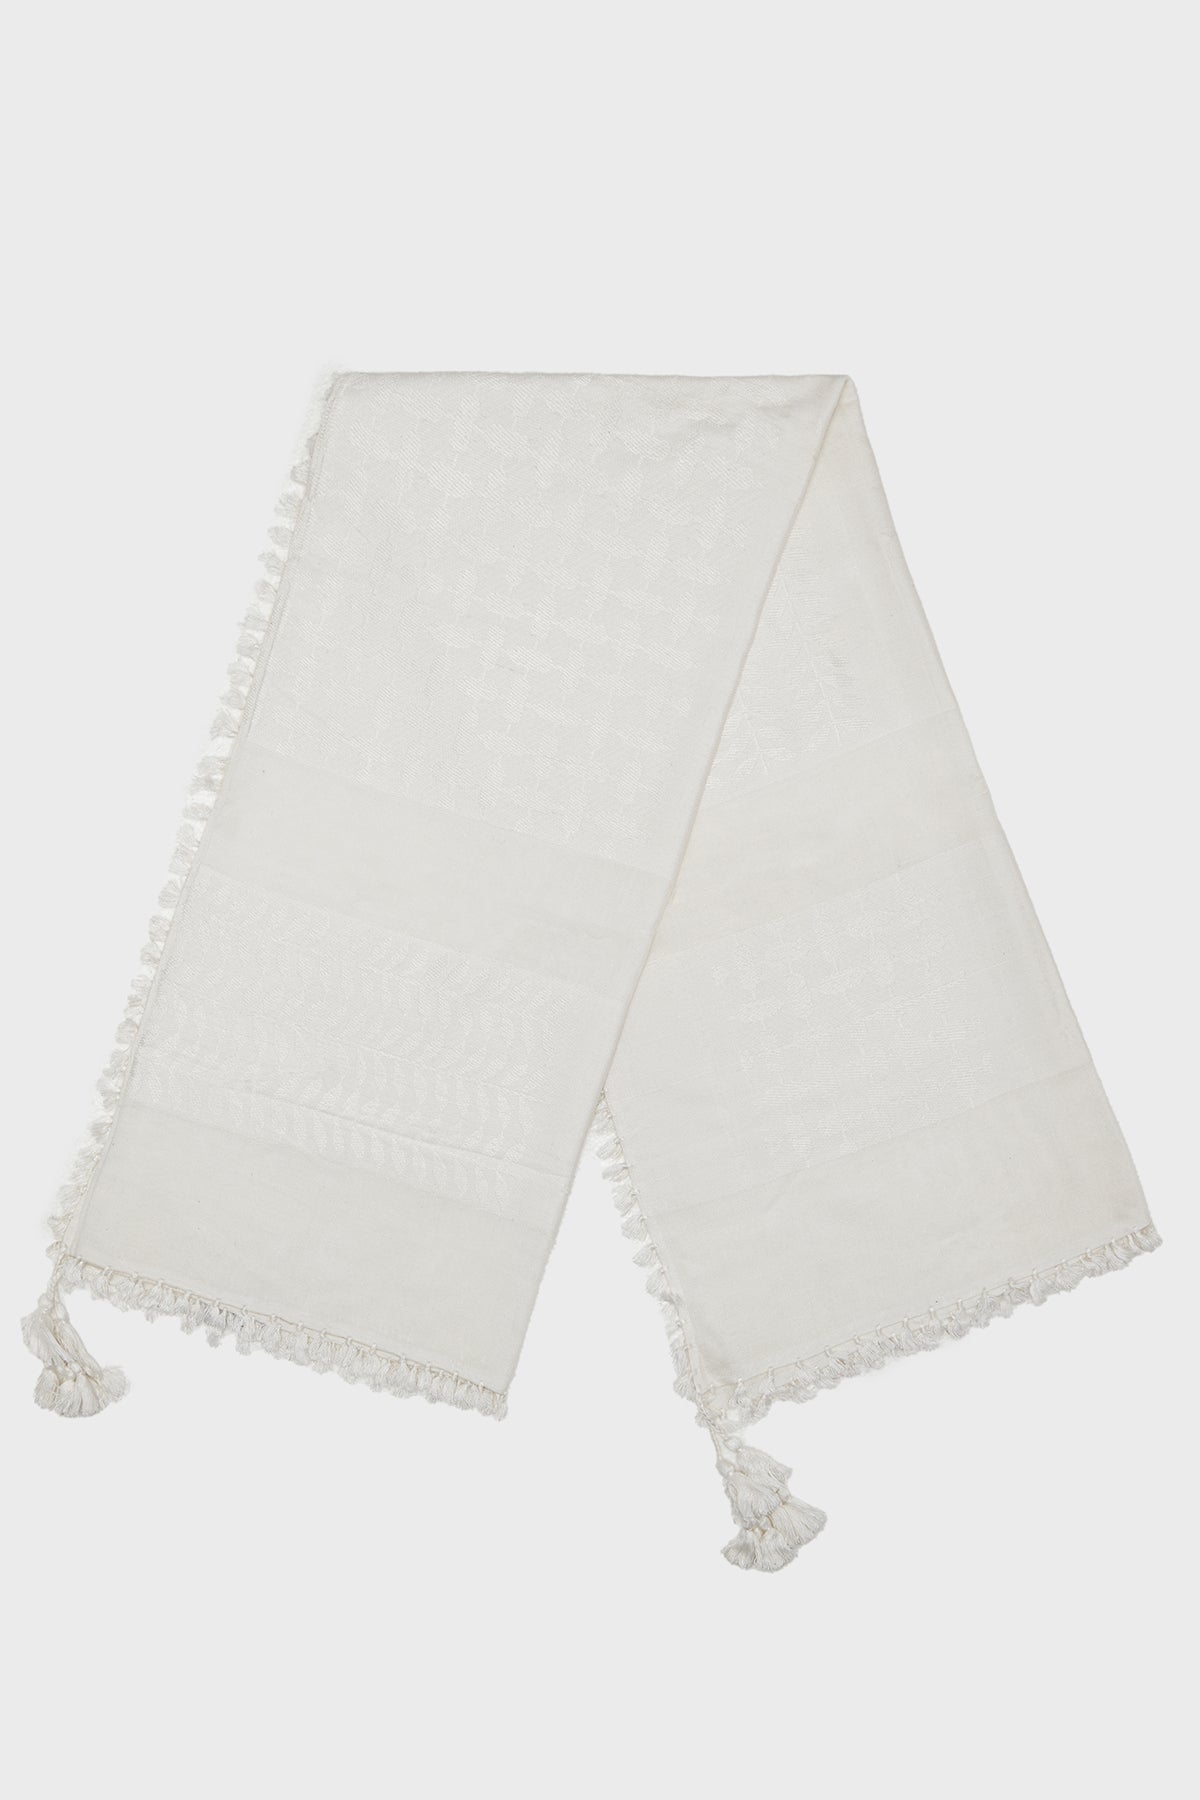 Pure White Bamboo Keffiyeh Scarf - CAVE